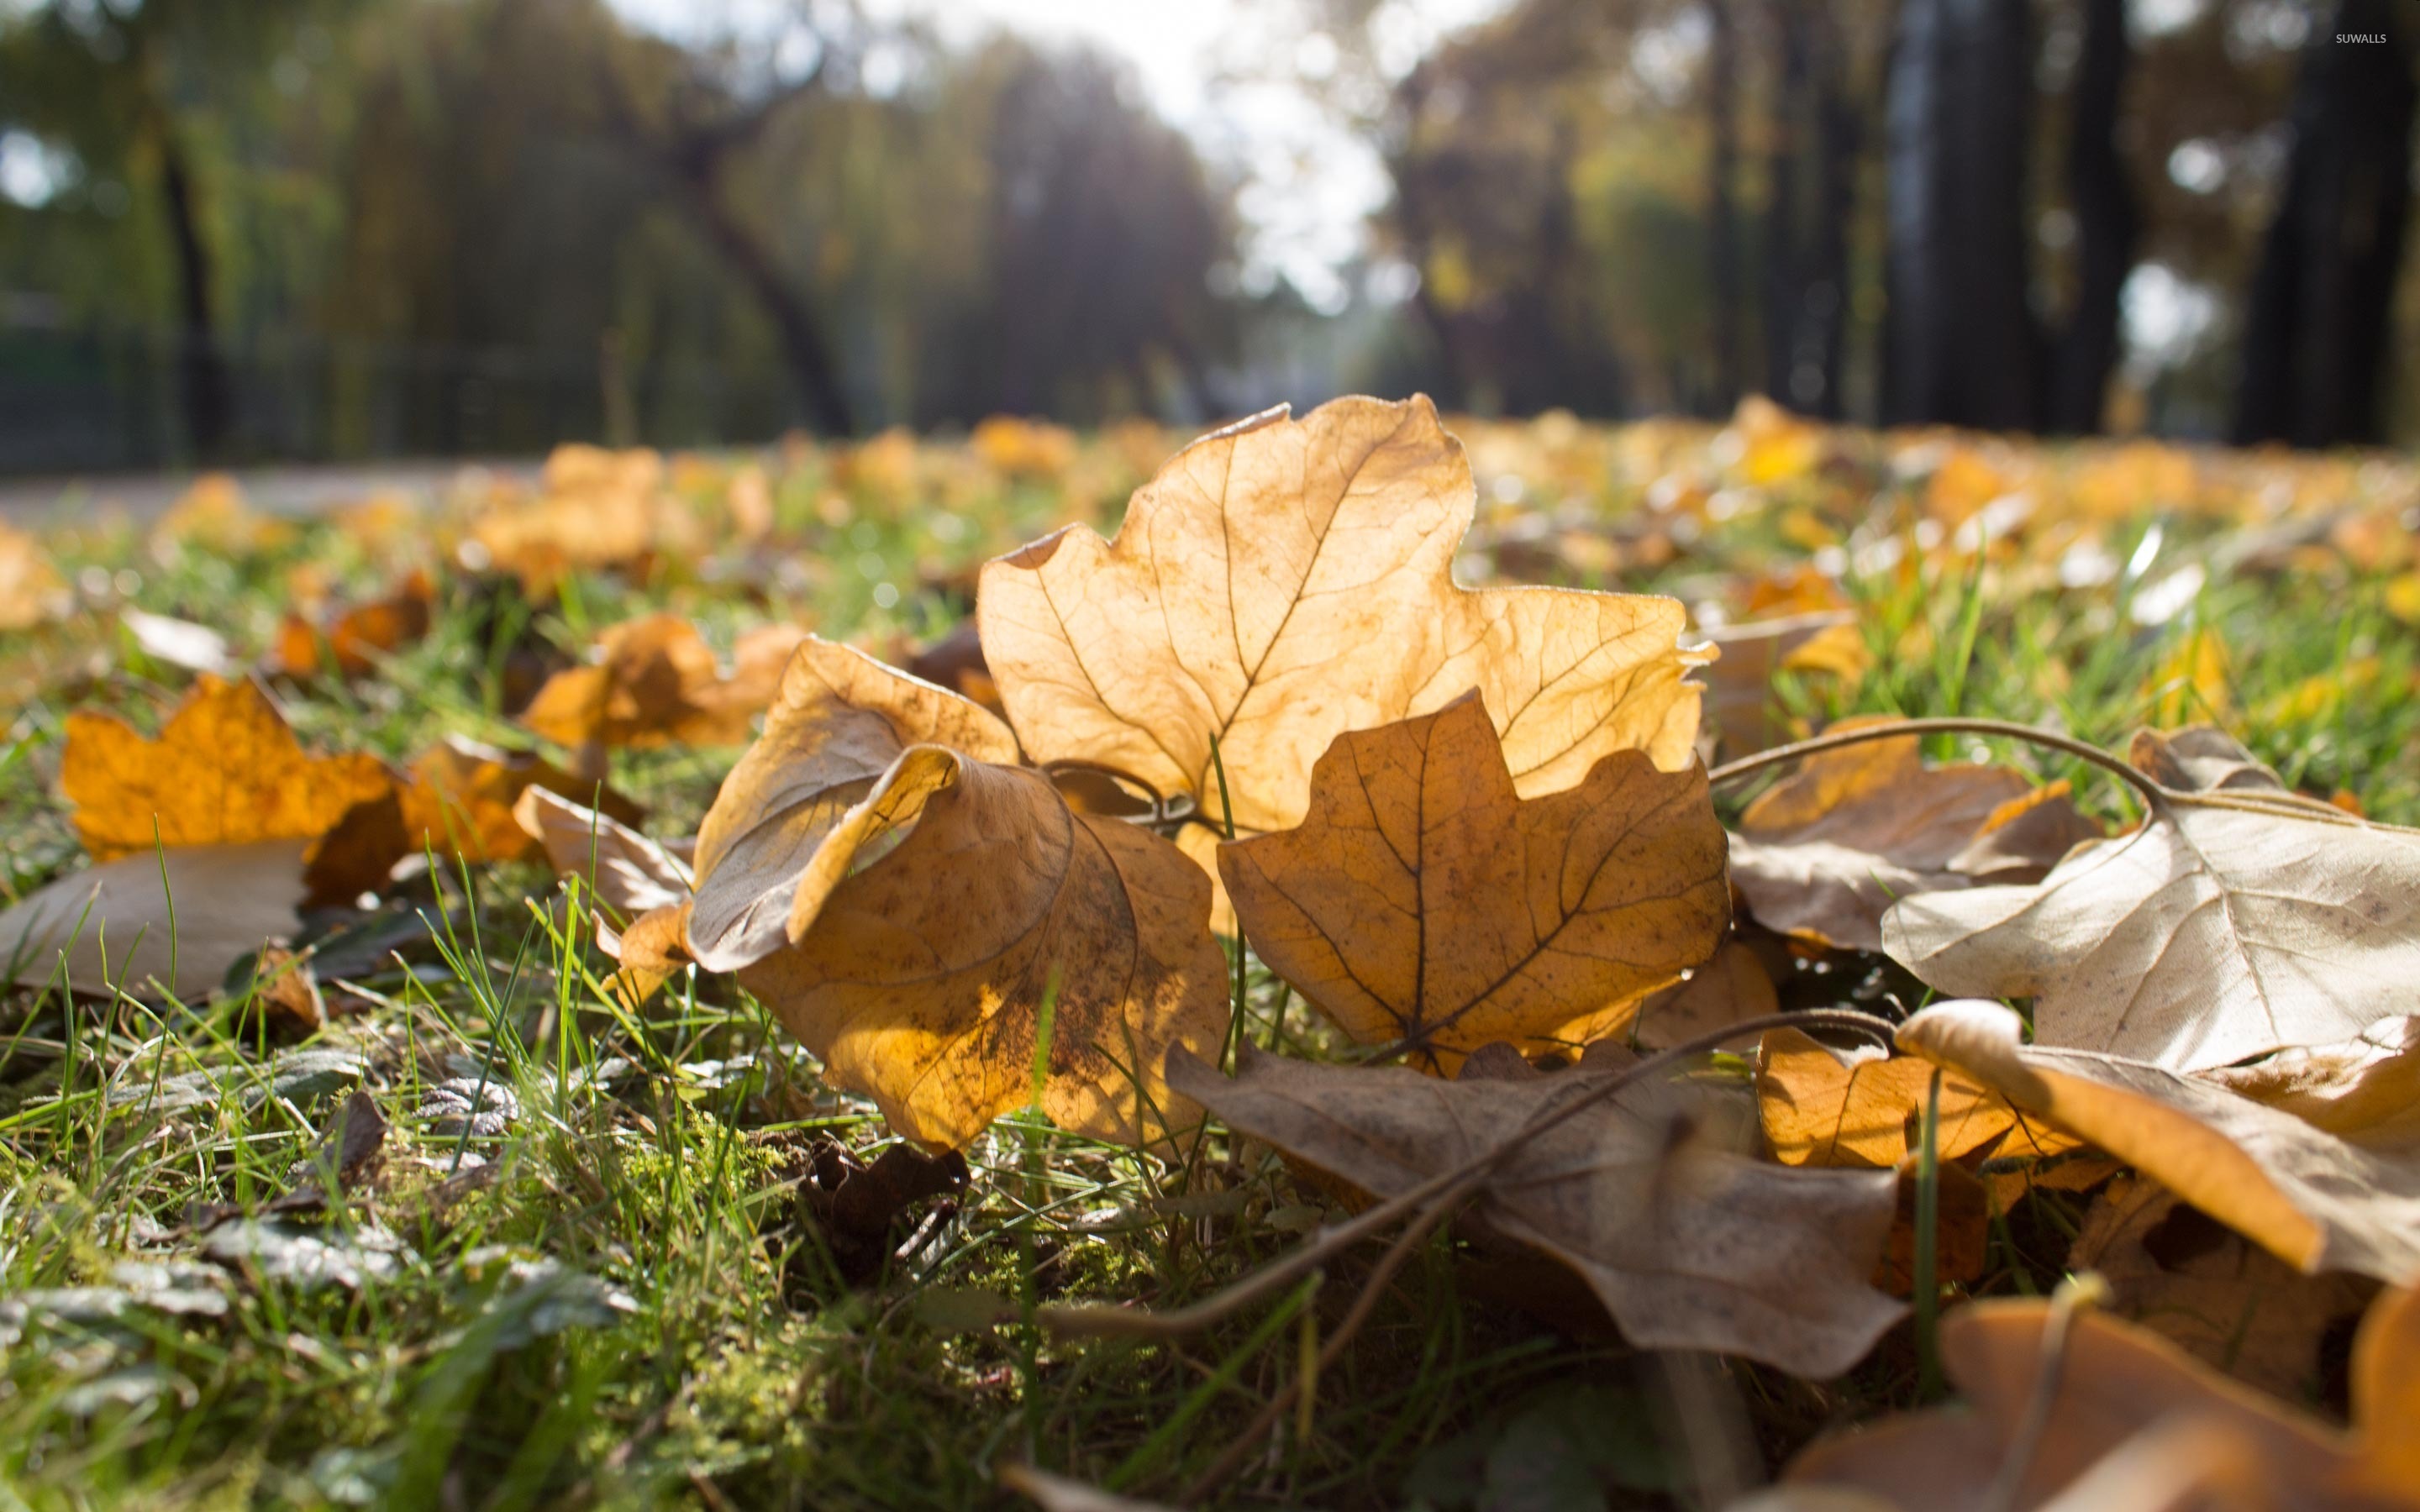 Sunshine over the dry leaves wallpaper - Nature wallpapers - #49017